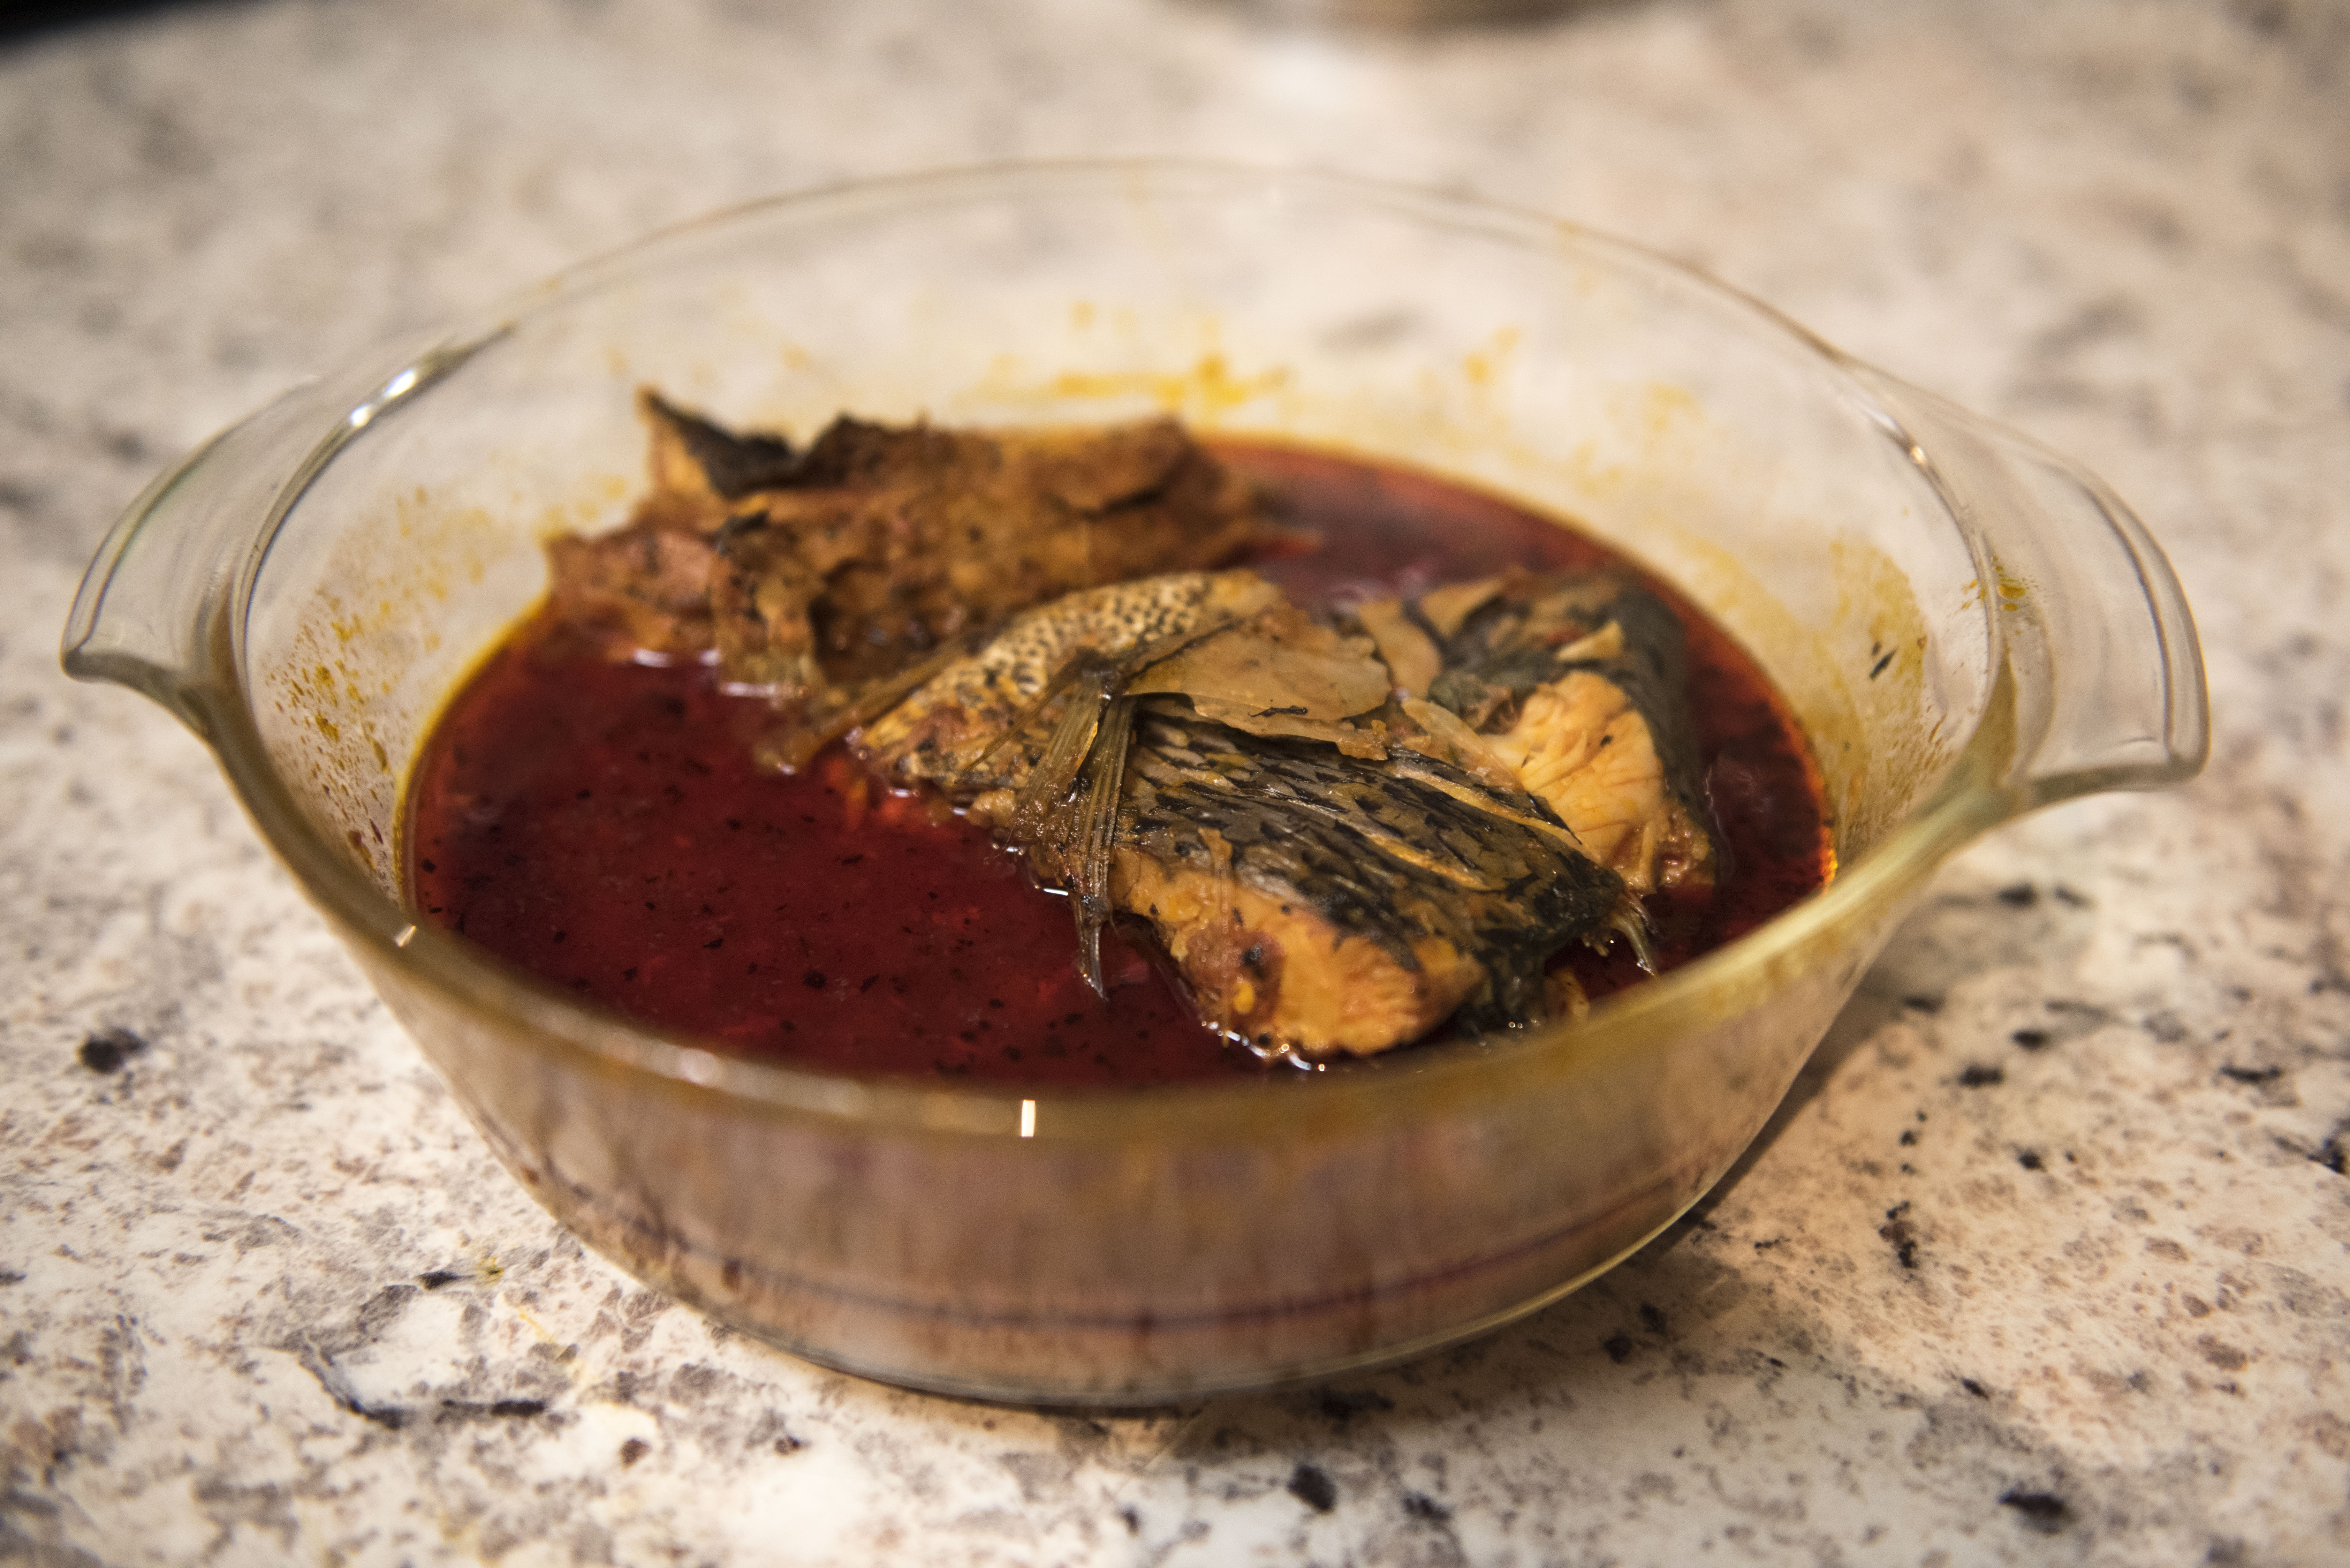 White fish stew, one of the many African meals prepared ahead by Malik’s mother before travelling to Guinea. Given their different schedules, Tamba and Malik are not used to sit and eat together.